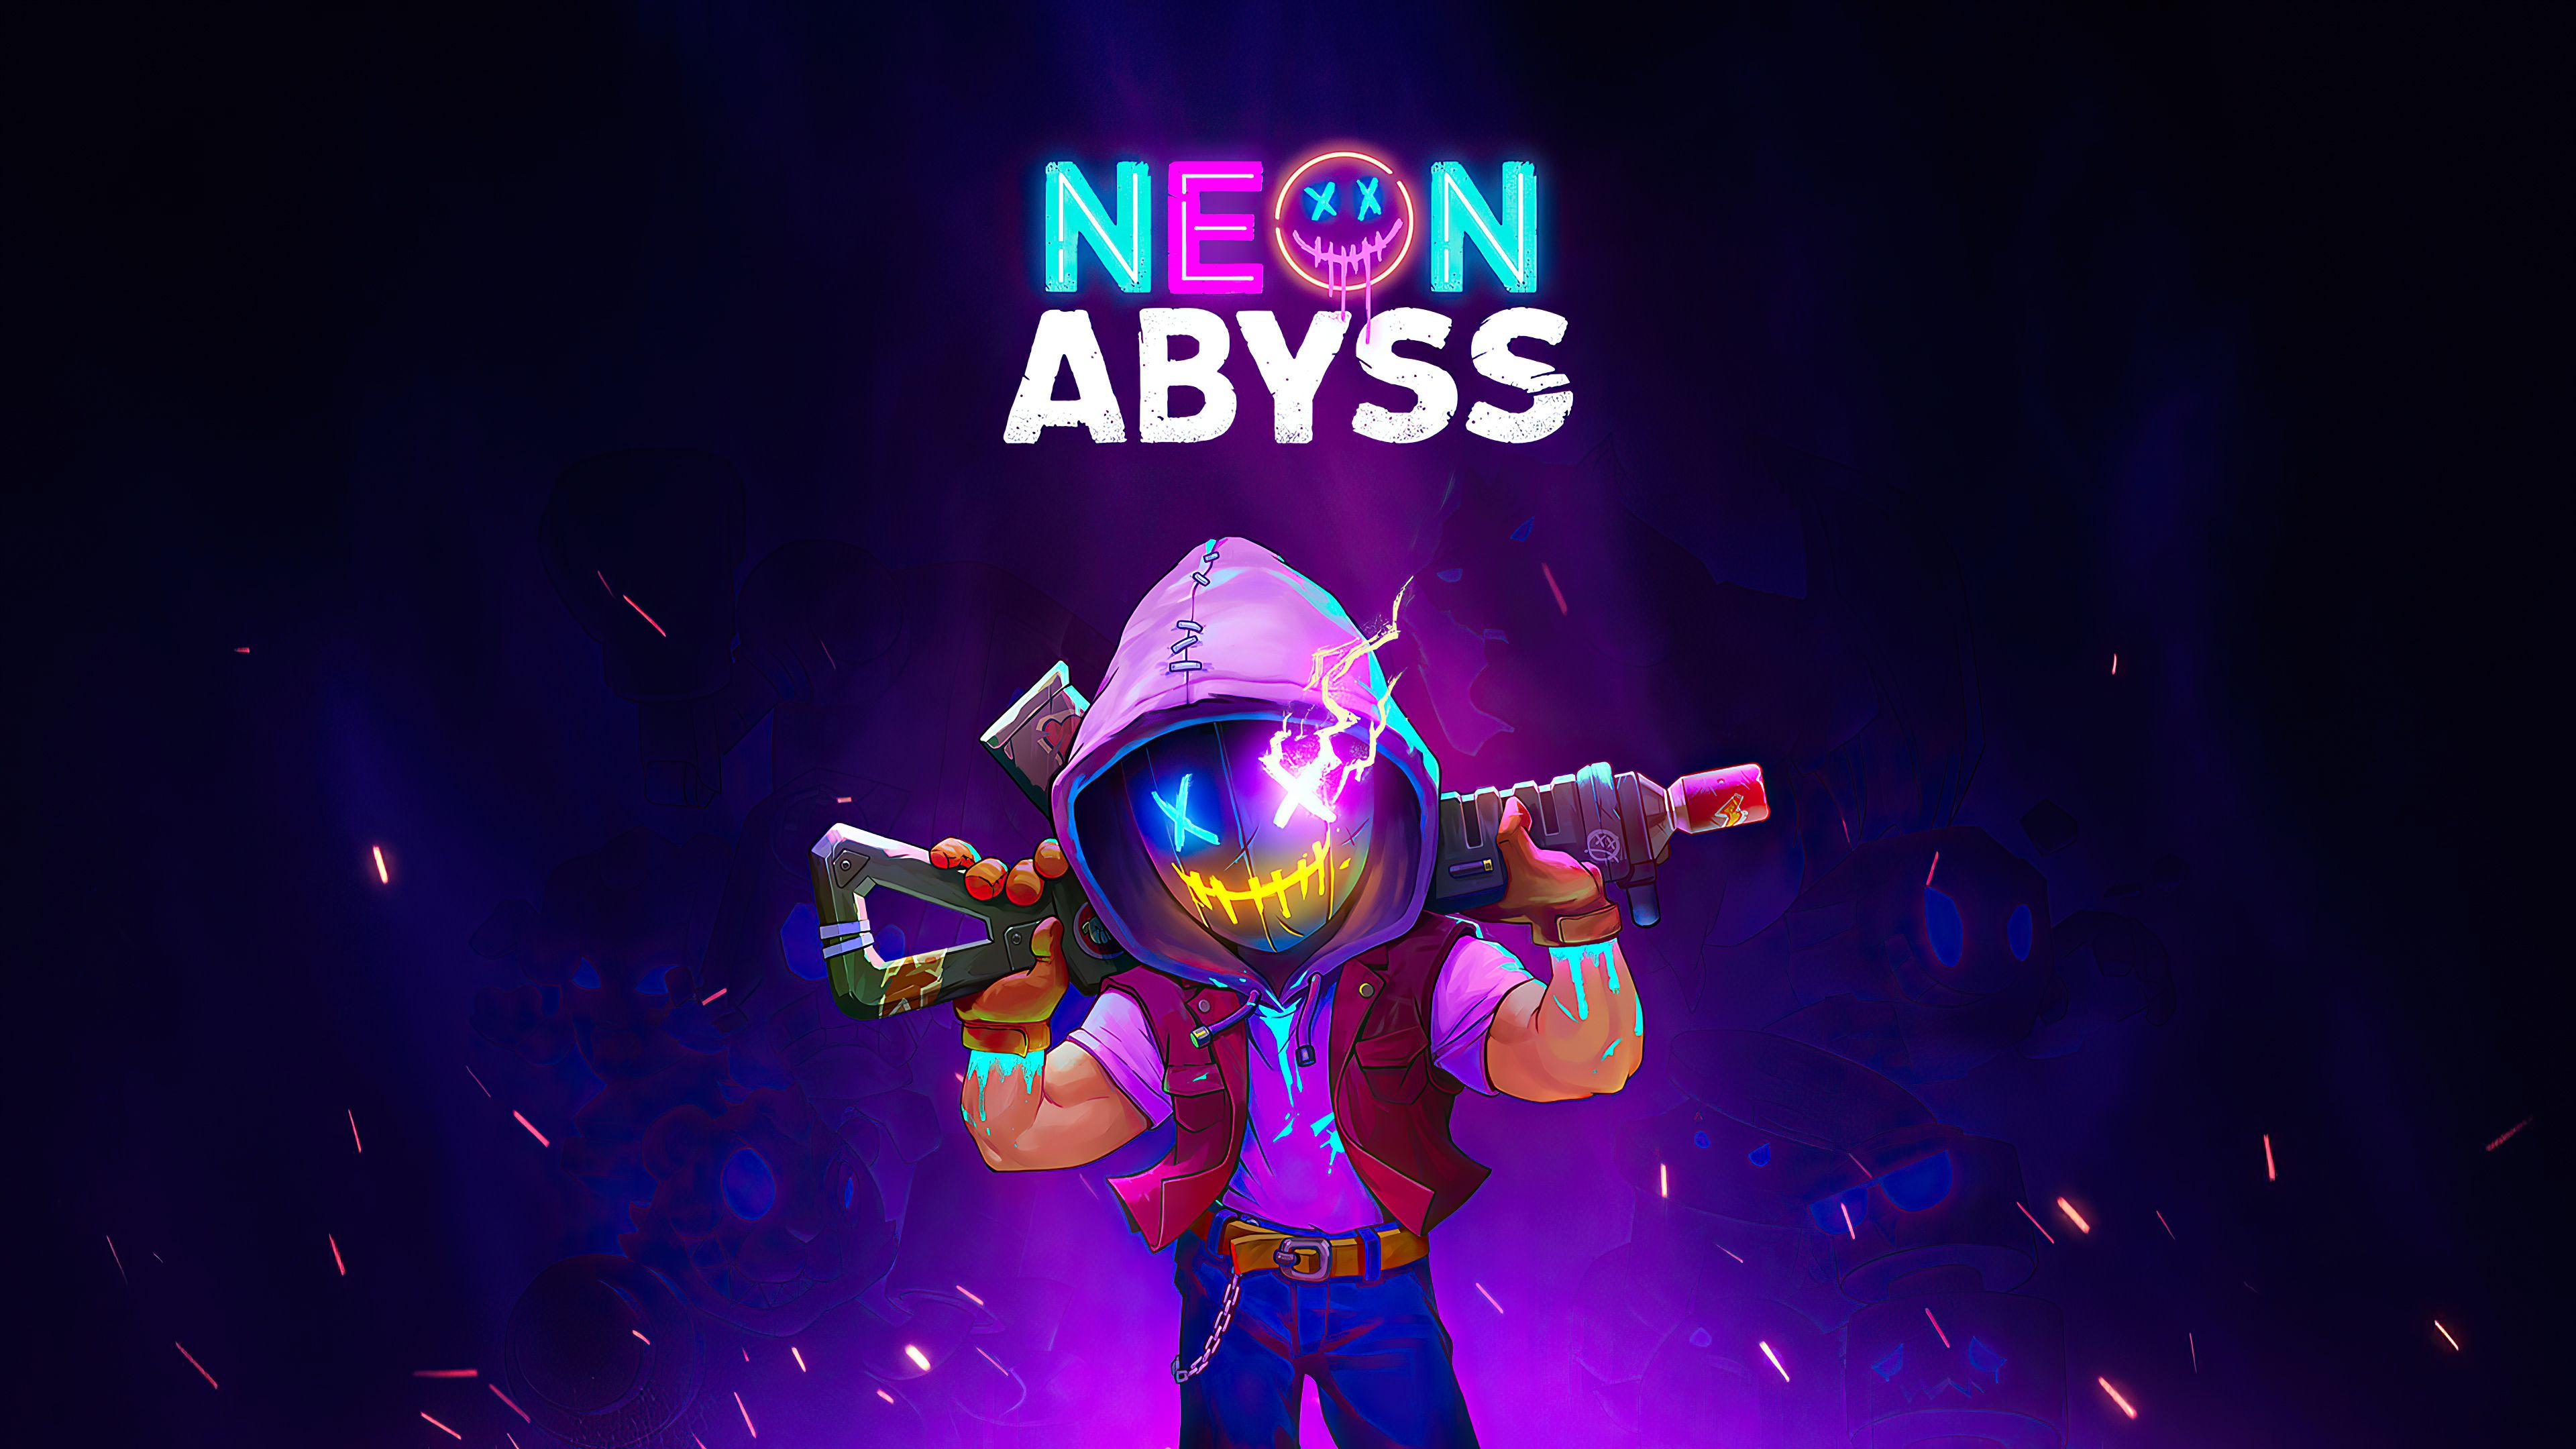 Wallpaper 4k Neon Abyss Neon Abyss 2020 game wallpaper 4k, Neon Abyss wallpaper